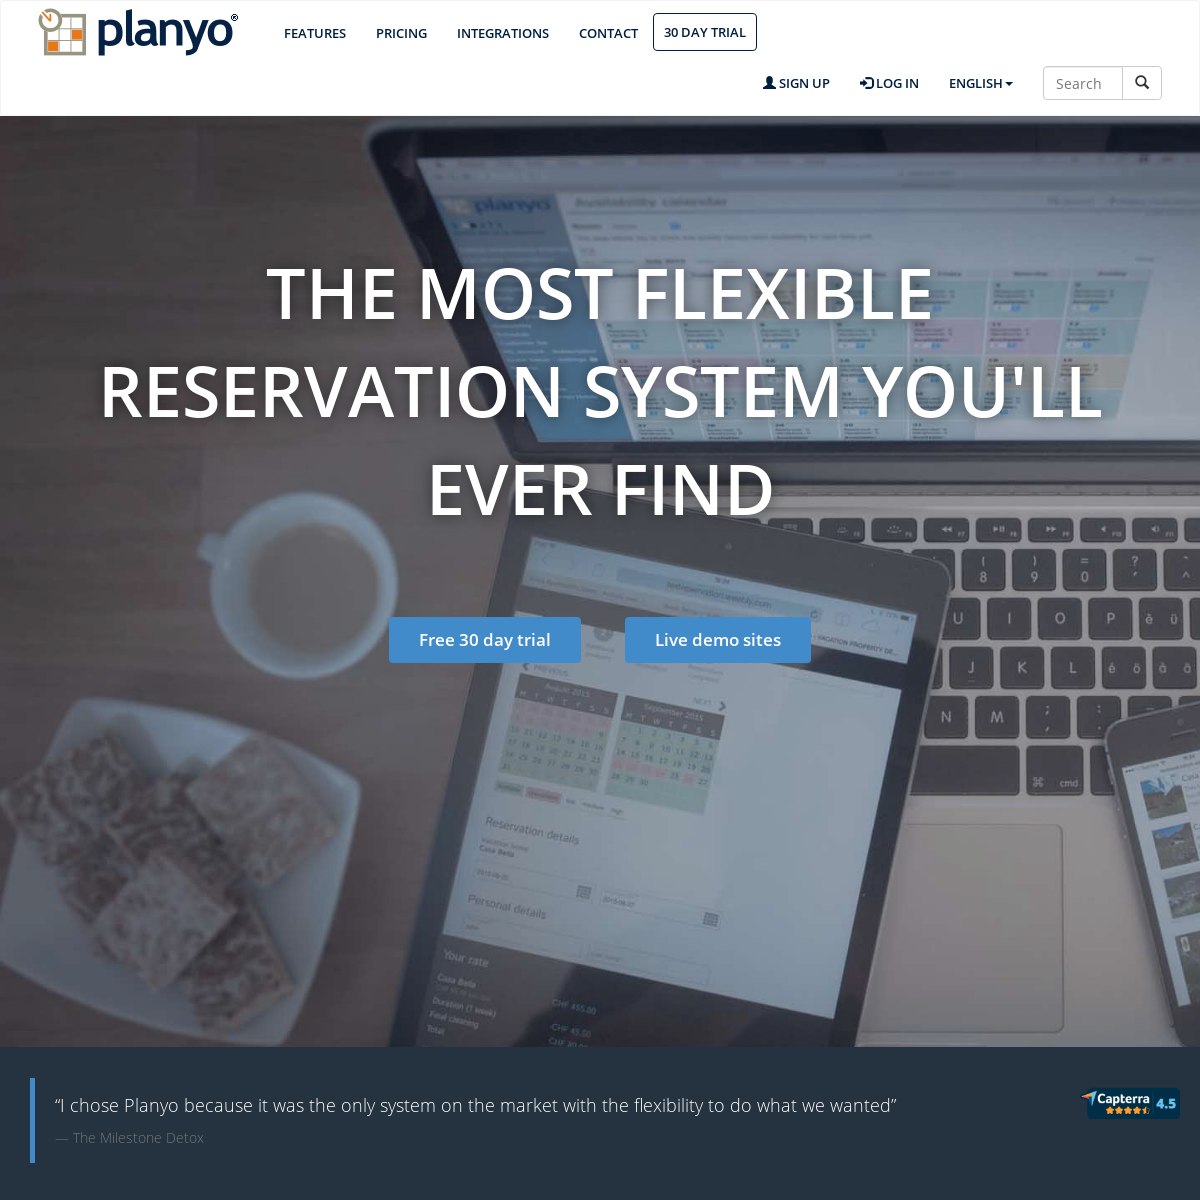 A complete backup of planyo.com